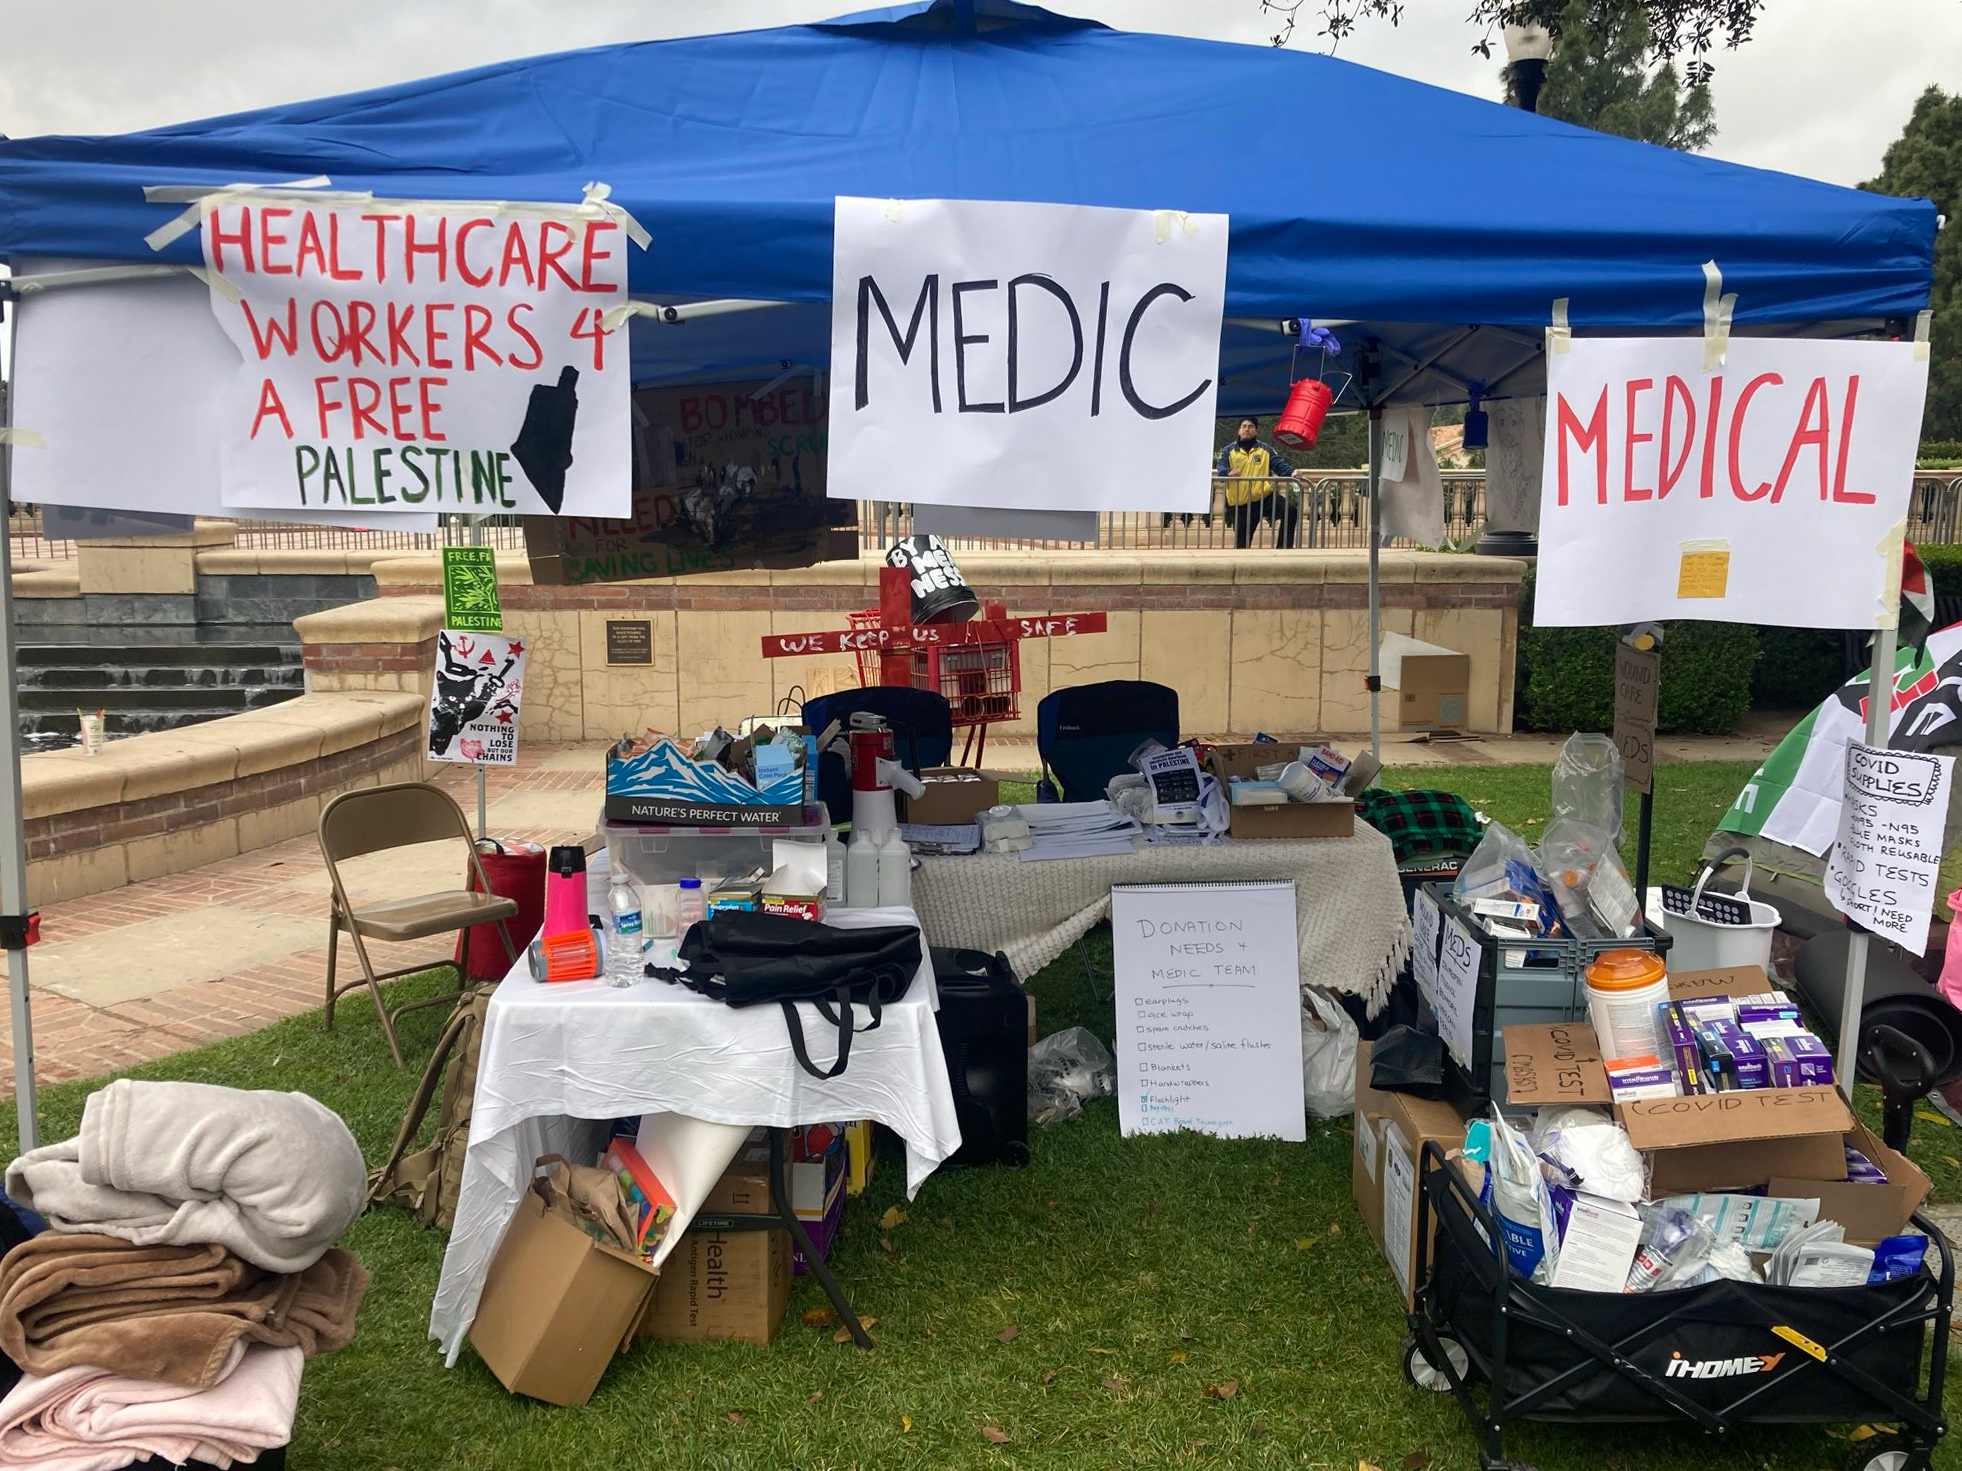 A photo of a makeshift medical tent with signs that read, "Healthcare workers for a free Palestine," along with signs that identify it as a medic tent.